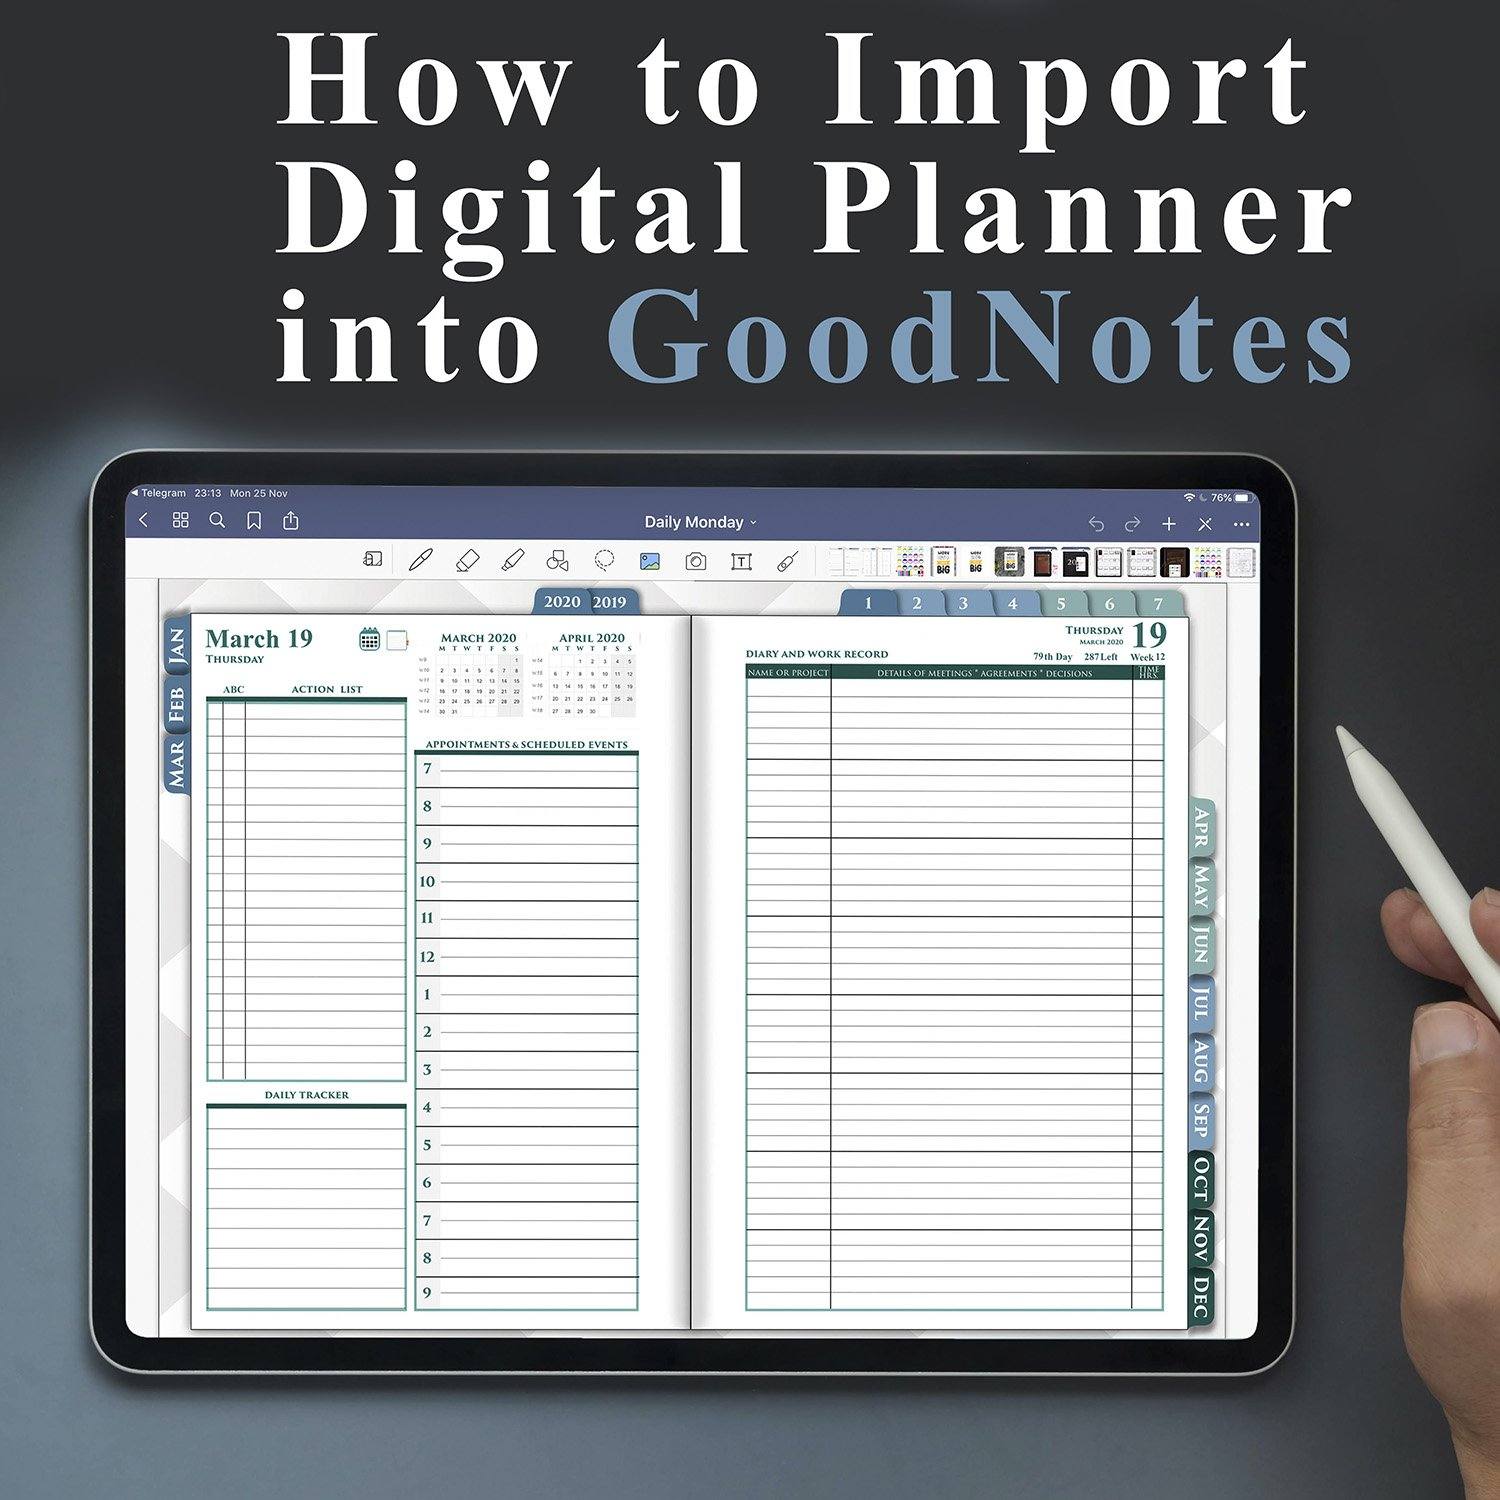 How to Install or Import Digital Planner into Goodnotes, Noteshelf or Notability - iPad Planner